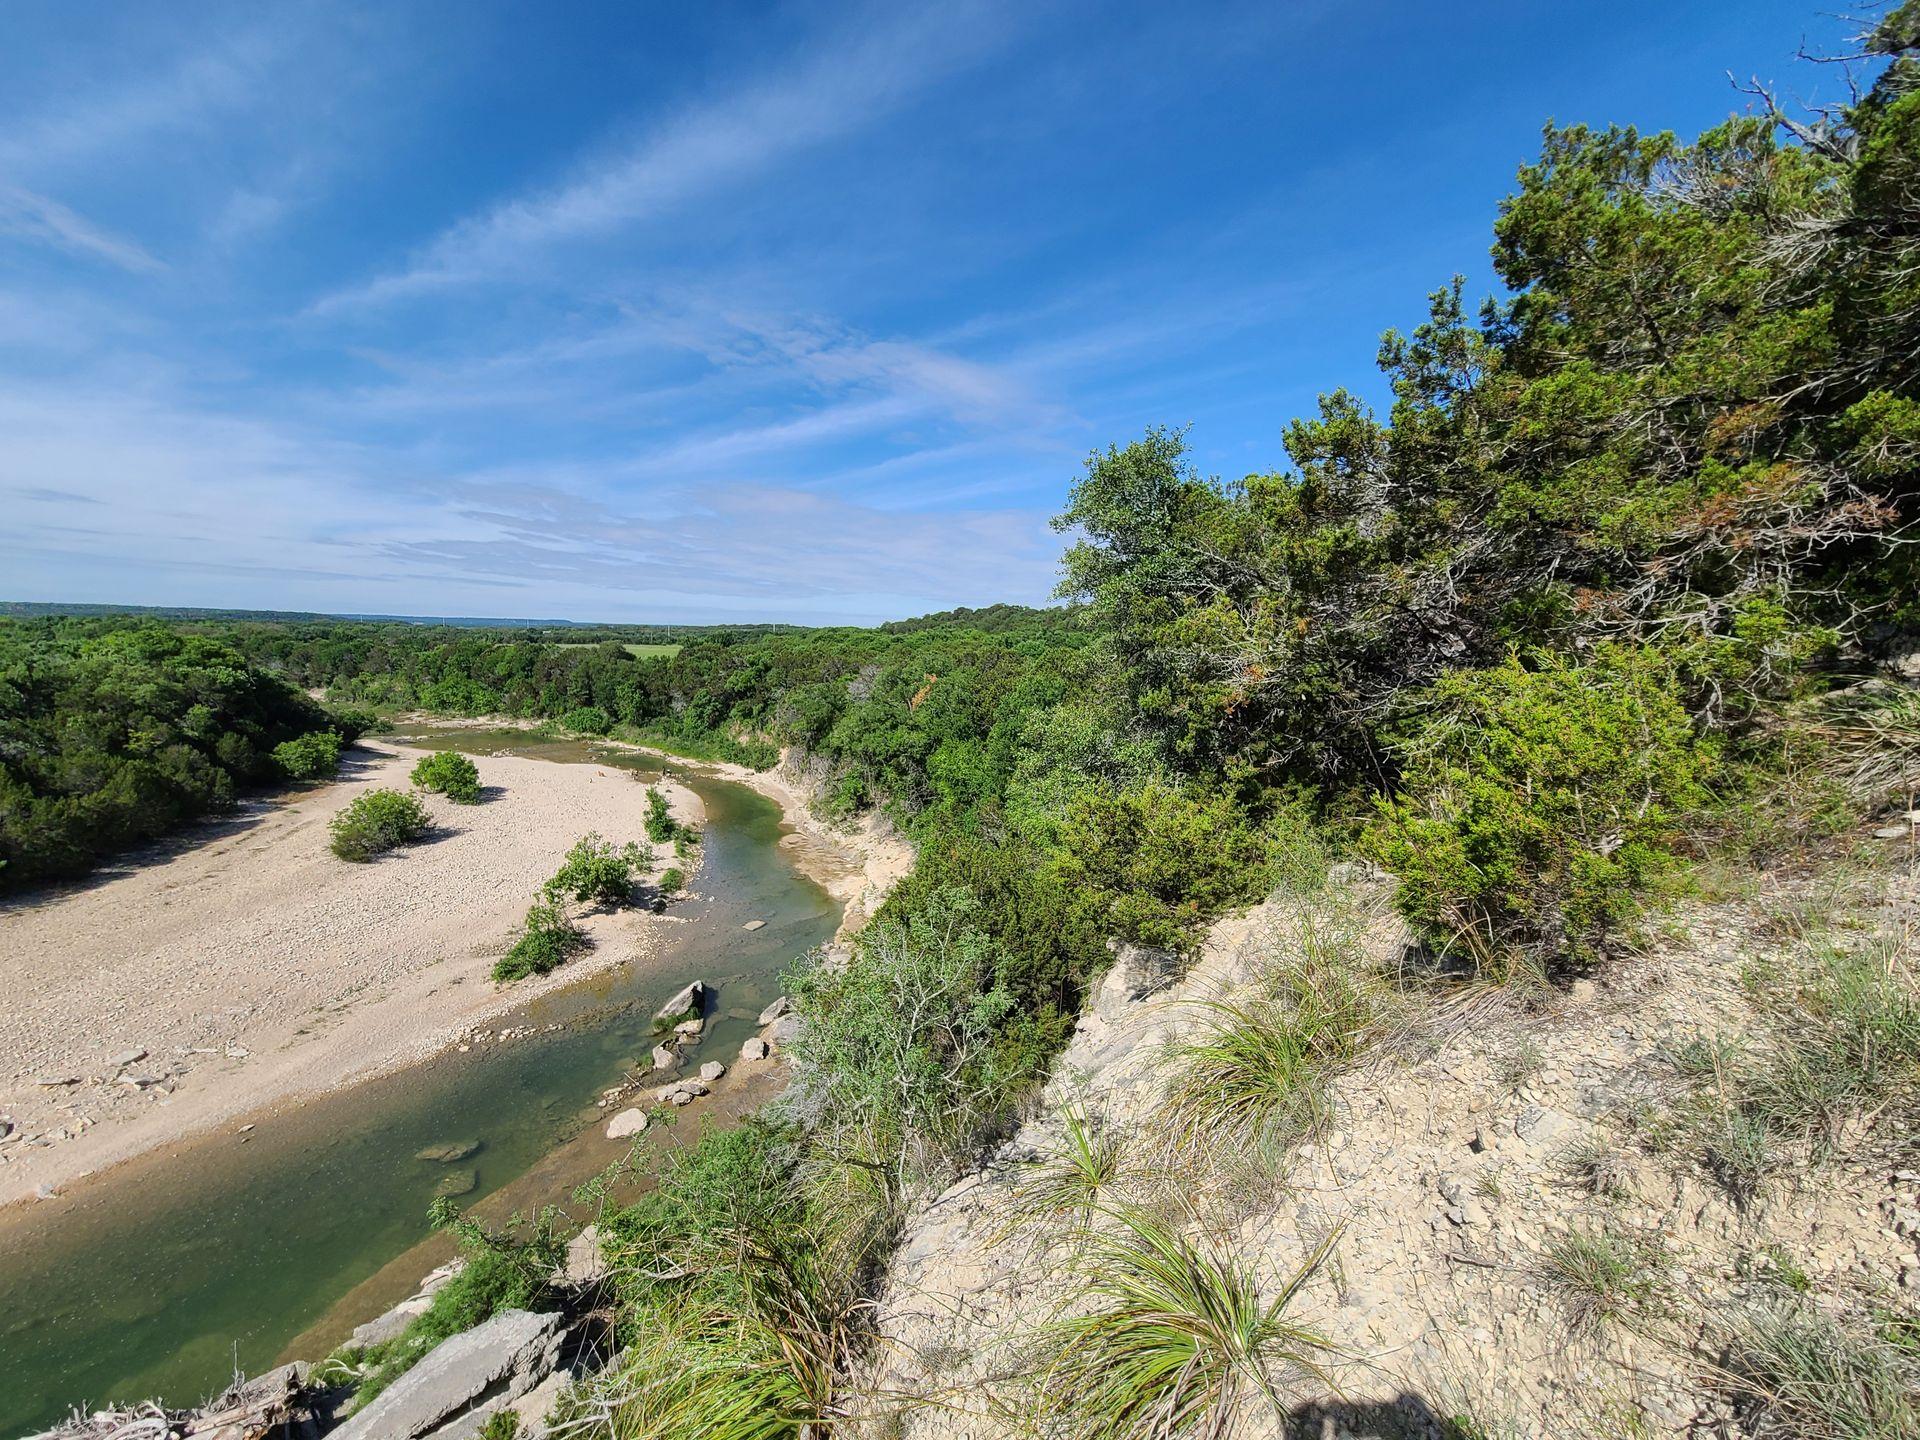 A view looking down at the Paluxy River at Dinosaur Valley State Park